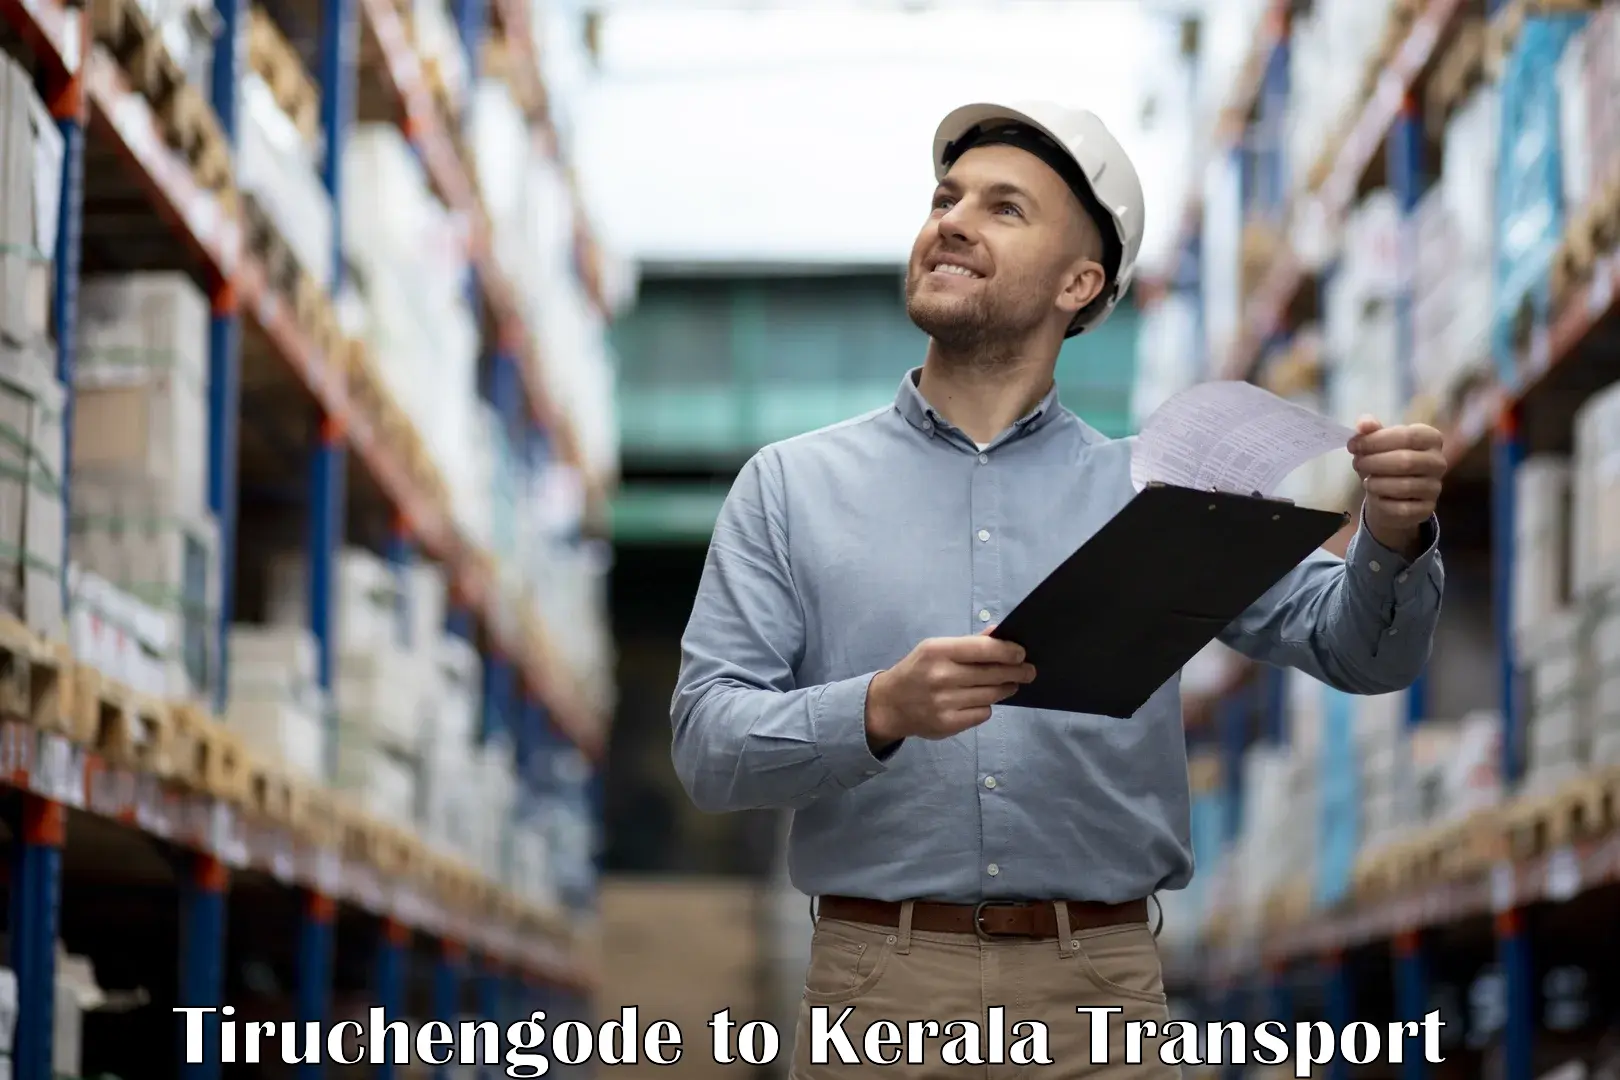 Container transportation services Tiruchengode to Kochi